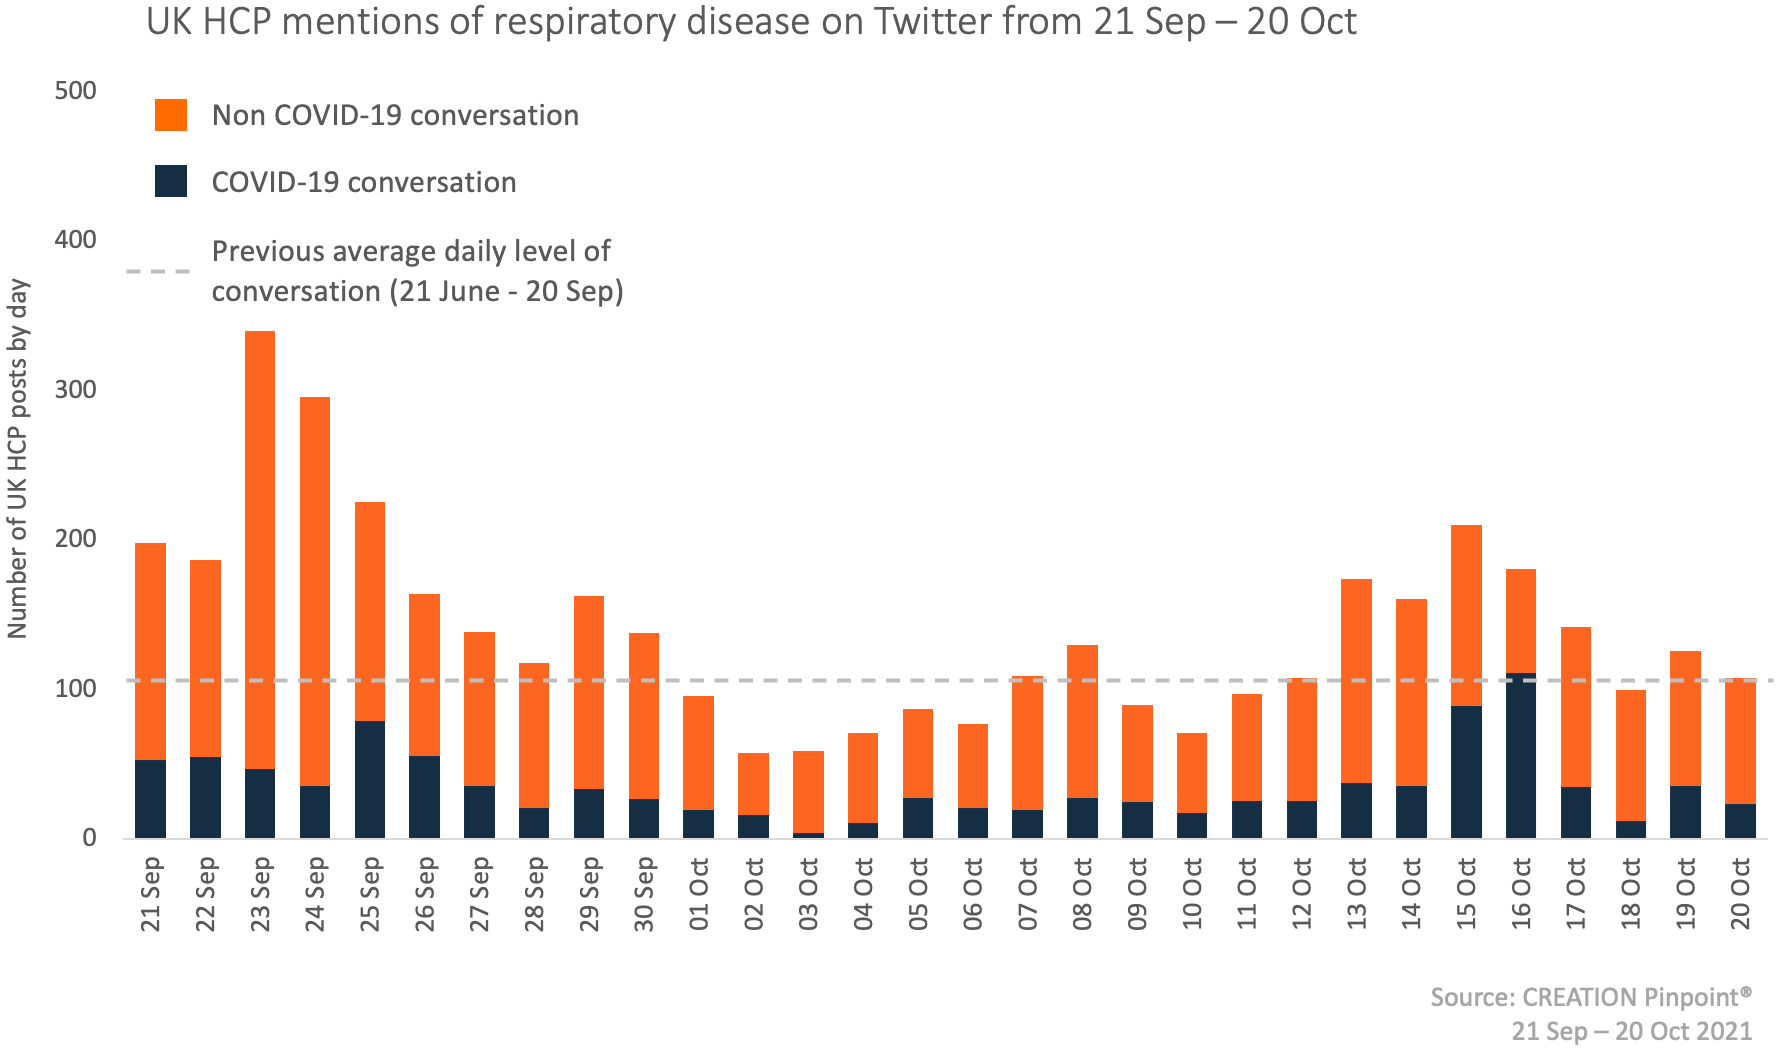 UK HCP mentions of respiratory disease on Twitter between September and October 2021